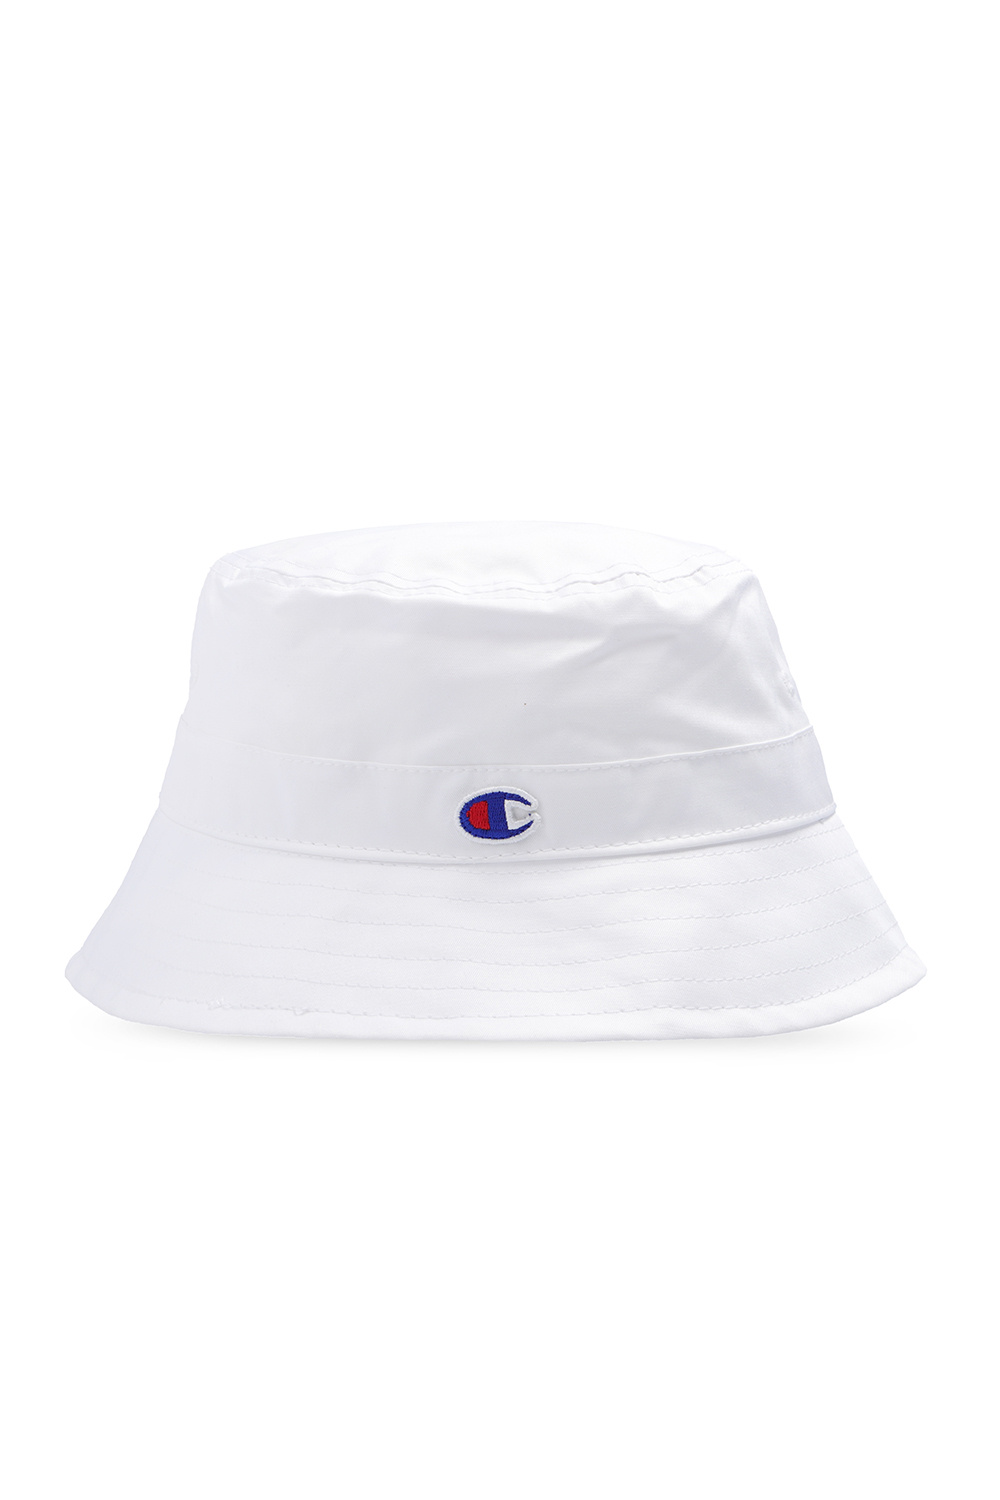 Champion curry 7 nerf super soaker hats